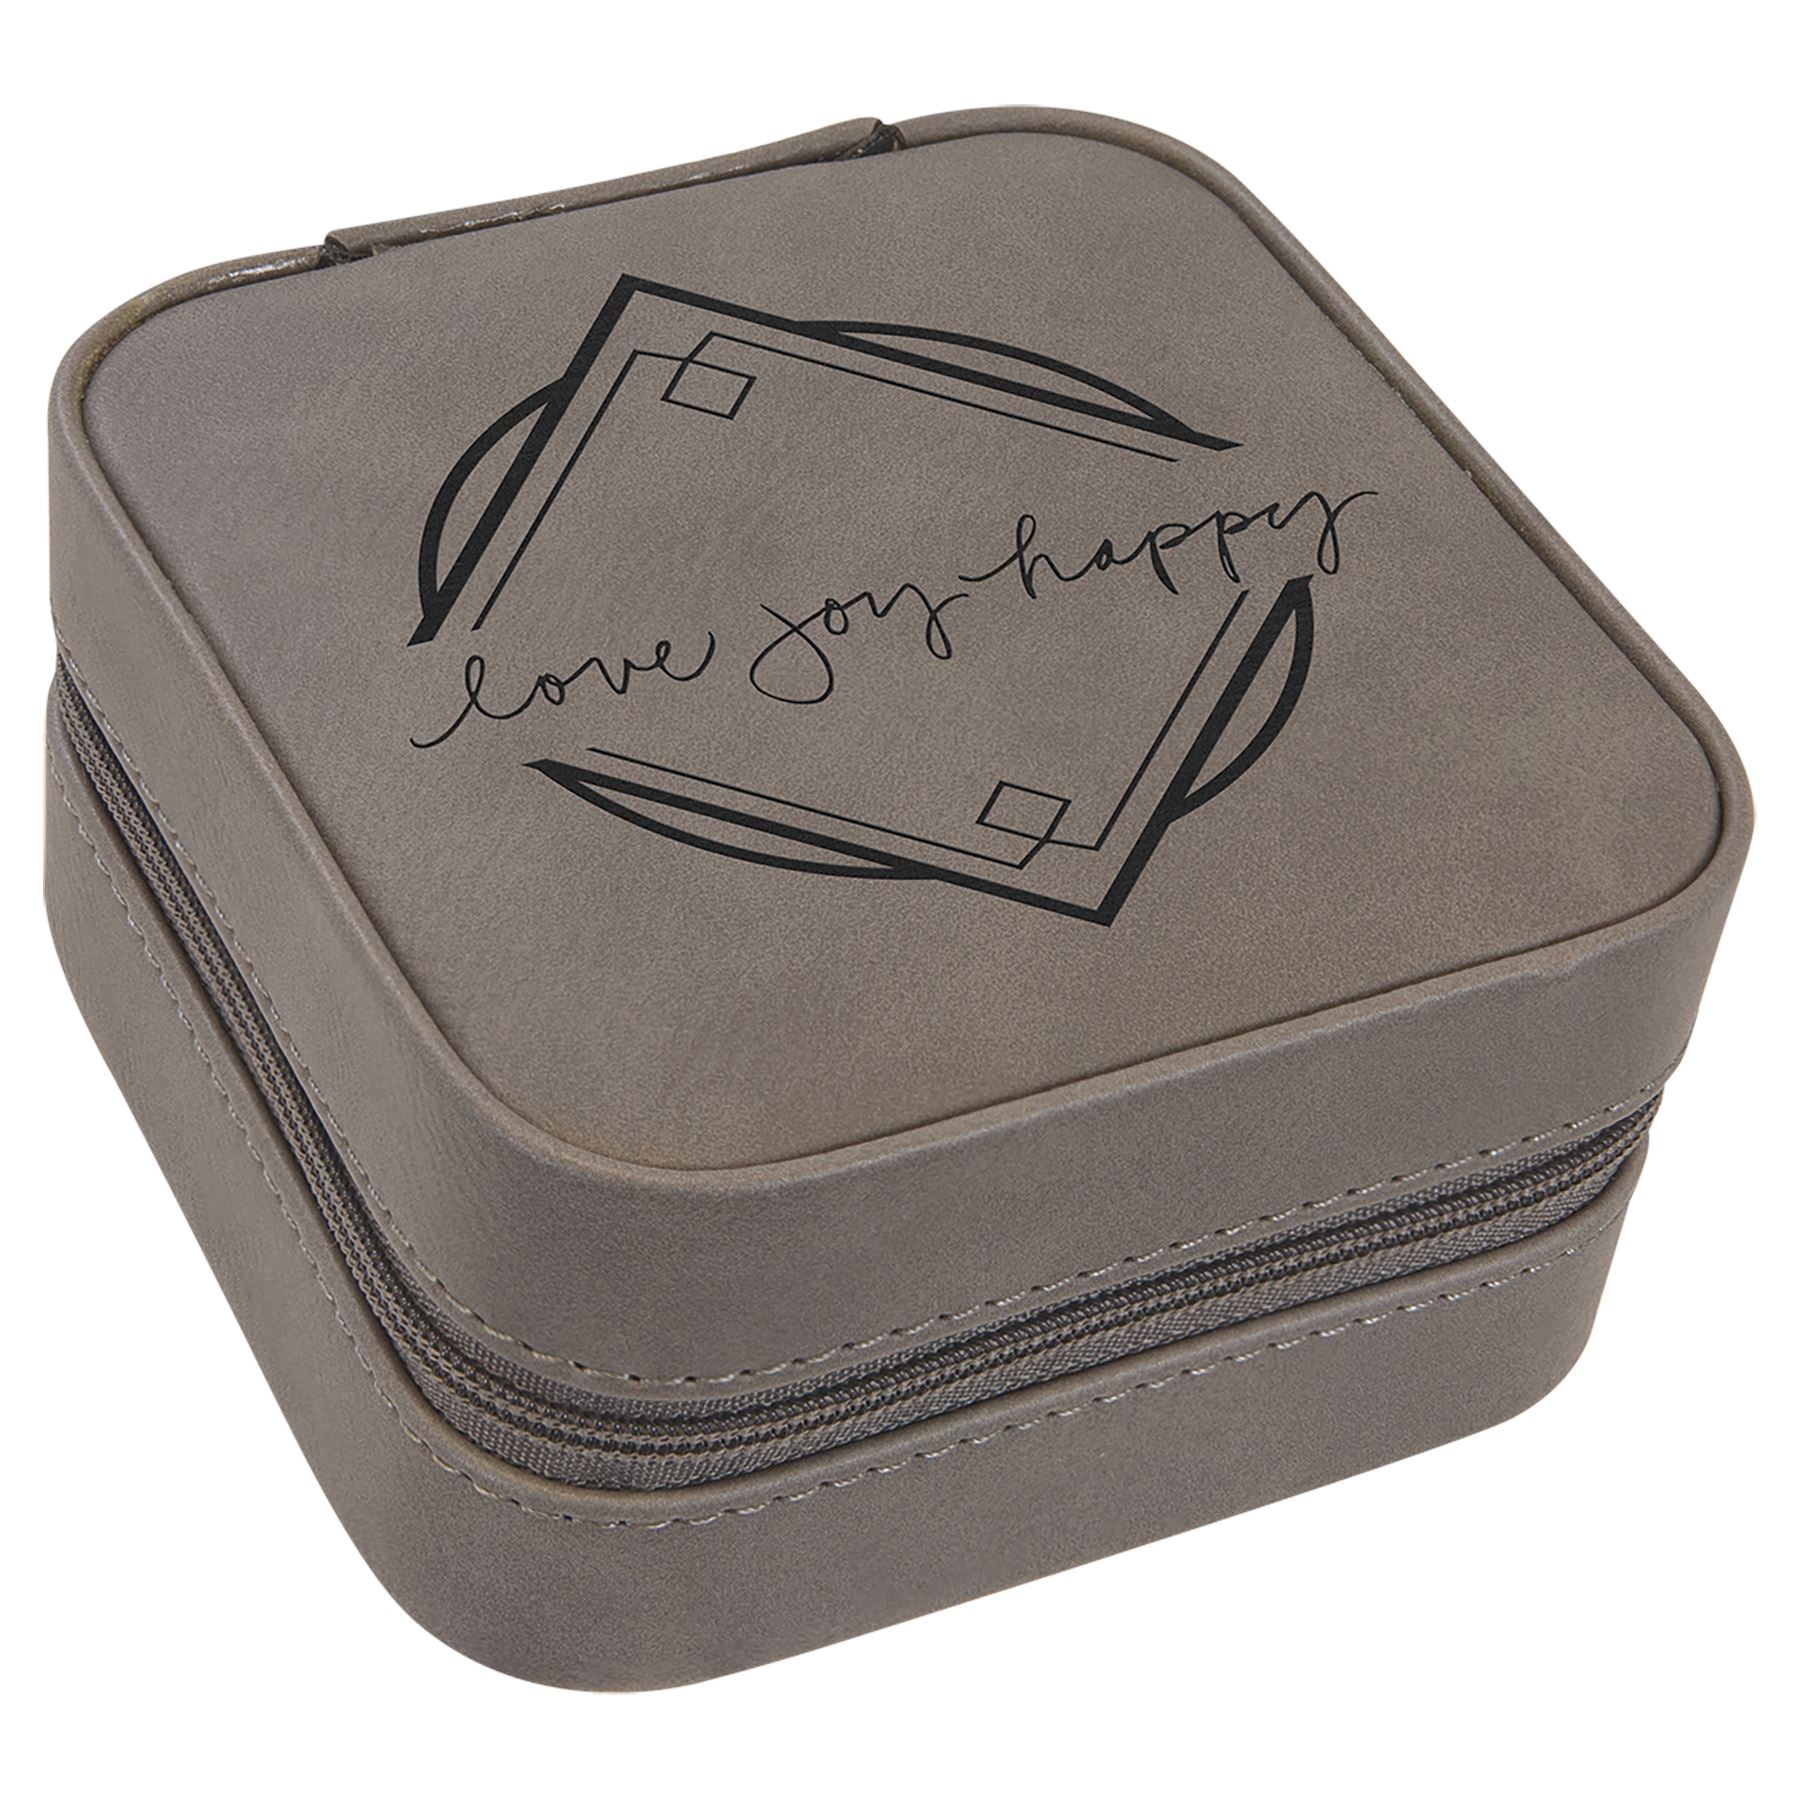 Travel Jewelry Box, Laserable Leatherette, Laser Engraved Jewelry Box Craftworks NW Gray/Black 